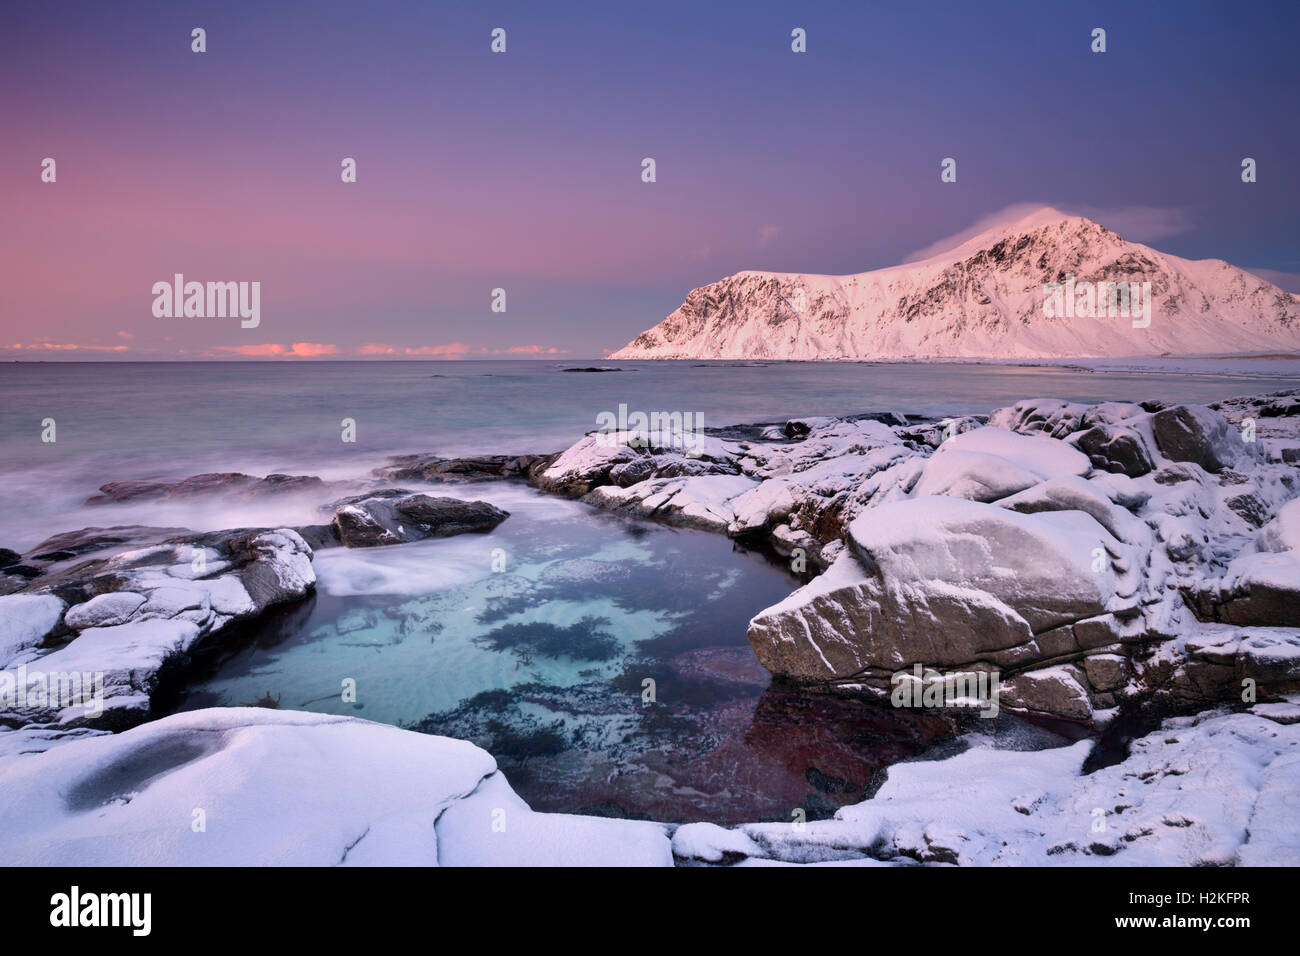 Alpenglow at the rocky beach of Skagsanden on the Lofoten in northern Norway, photographed at dusk in winter. Stock Photo